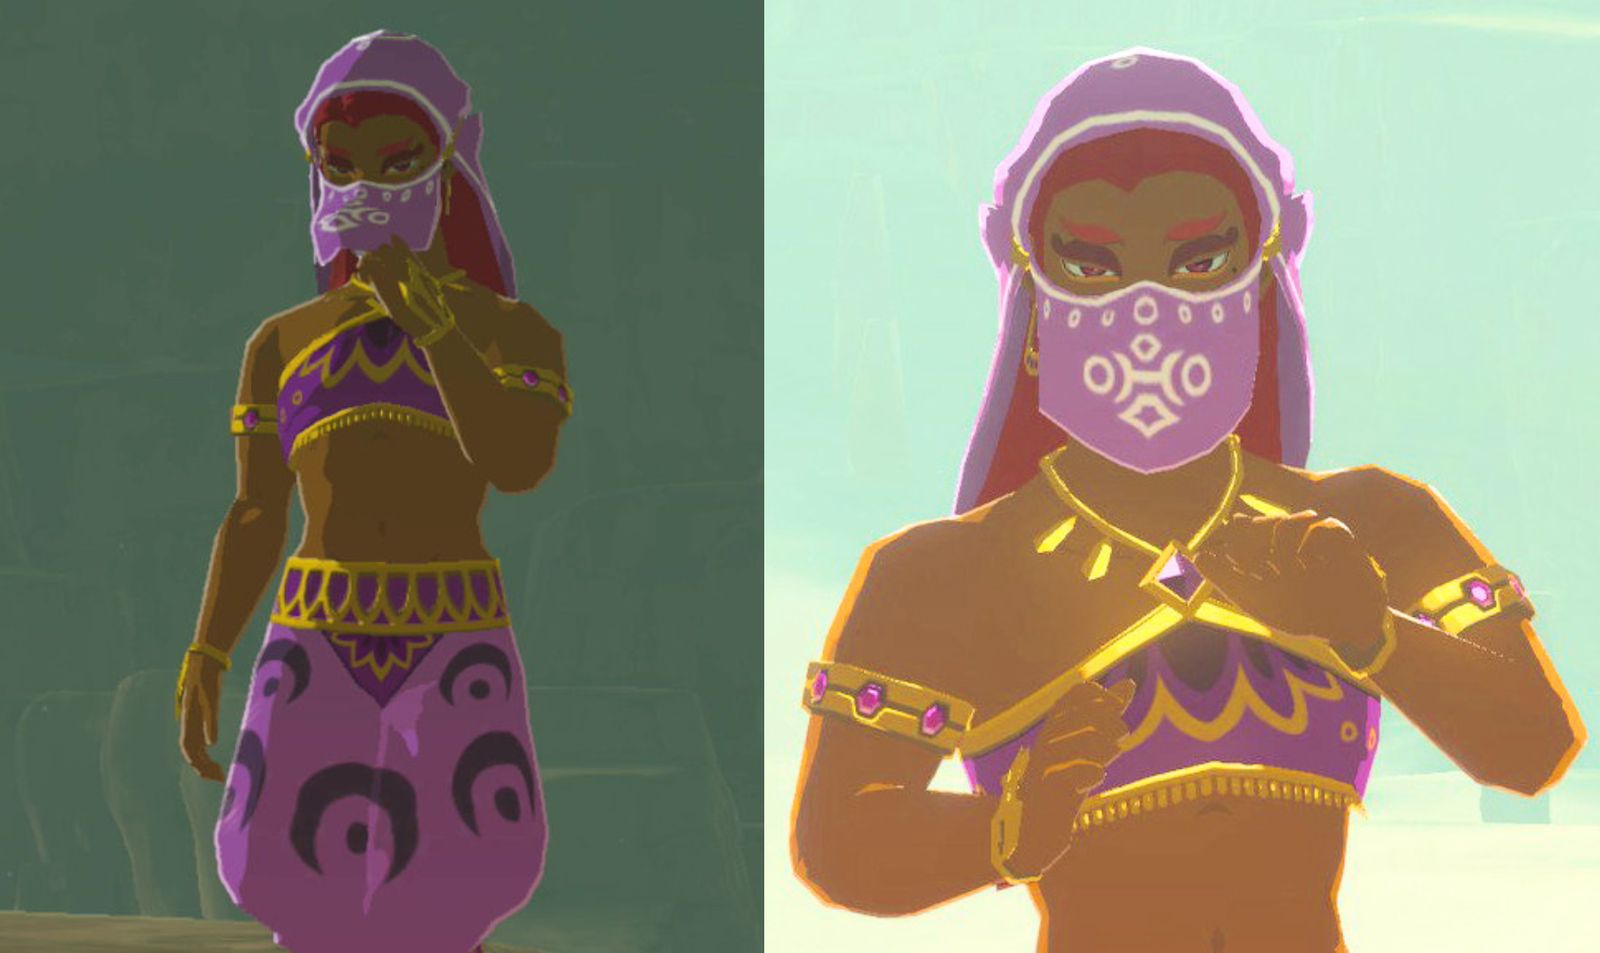 Two images of Vilia wearing a light purple veil and purple and gold clothing.